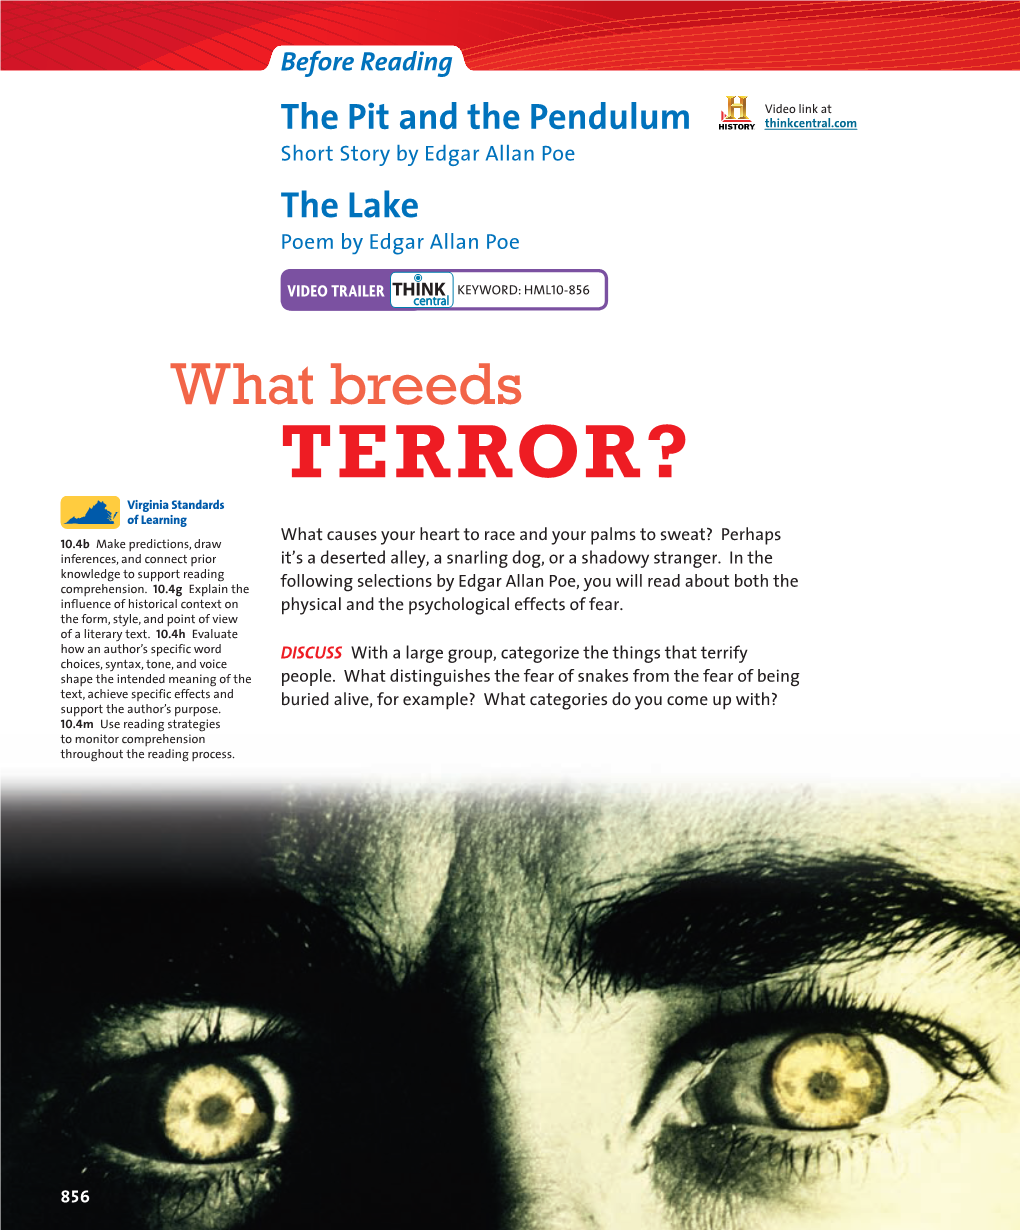 TERROR? the Pit and the Pendulum